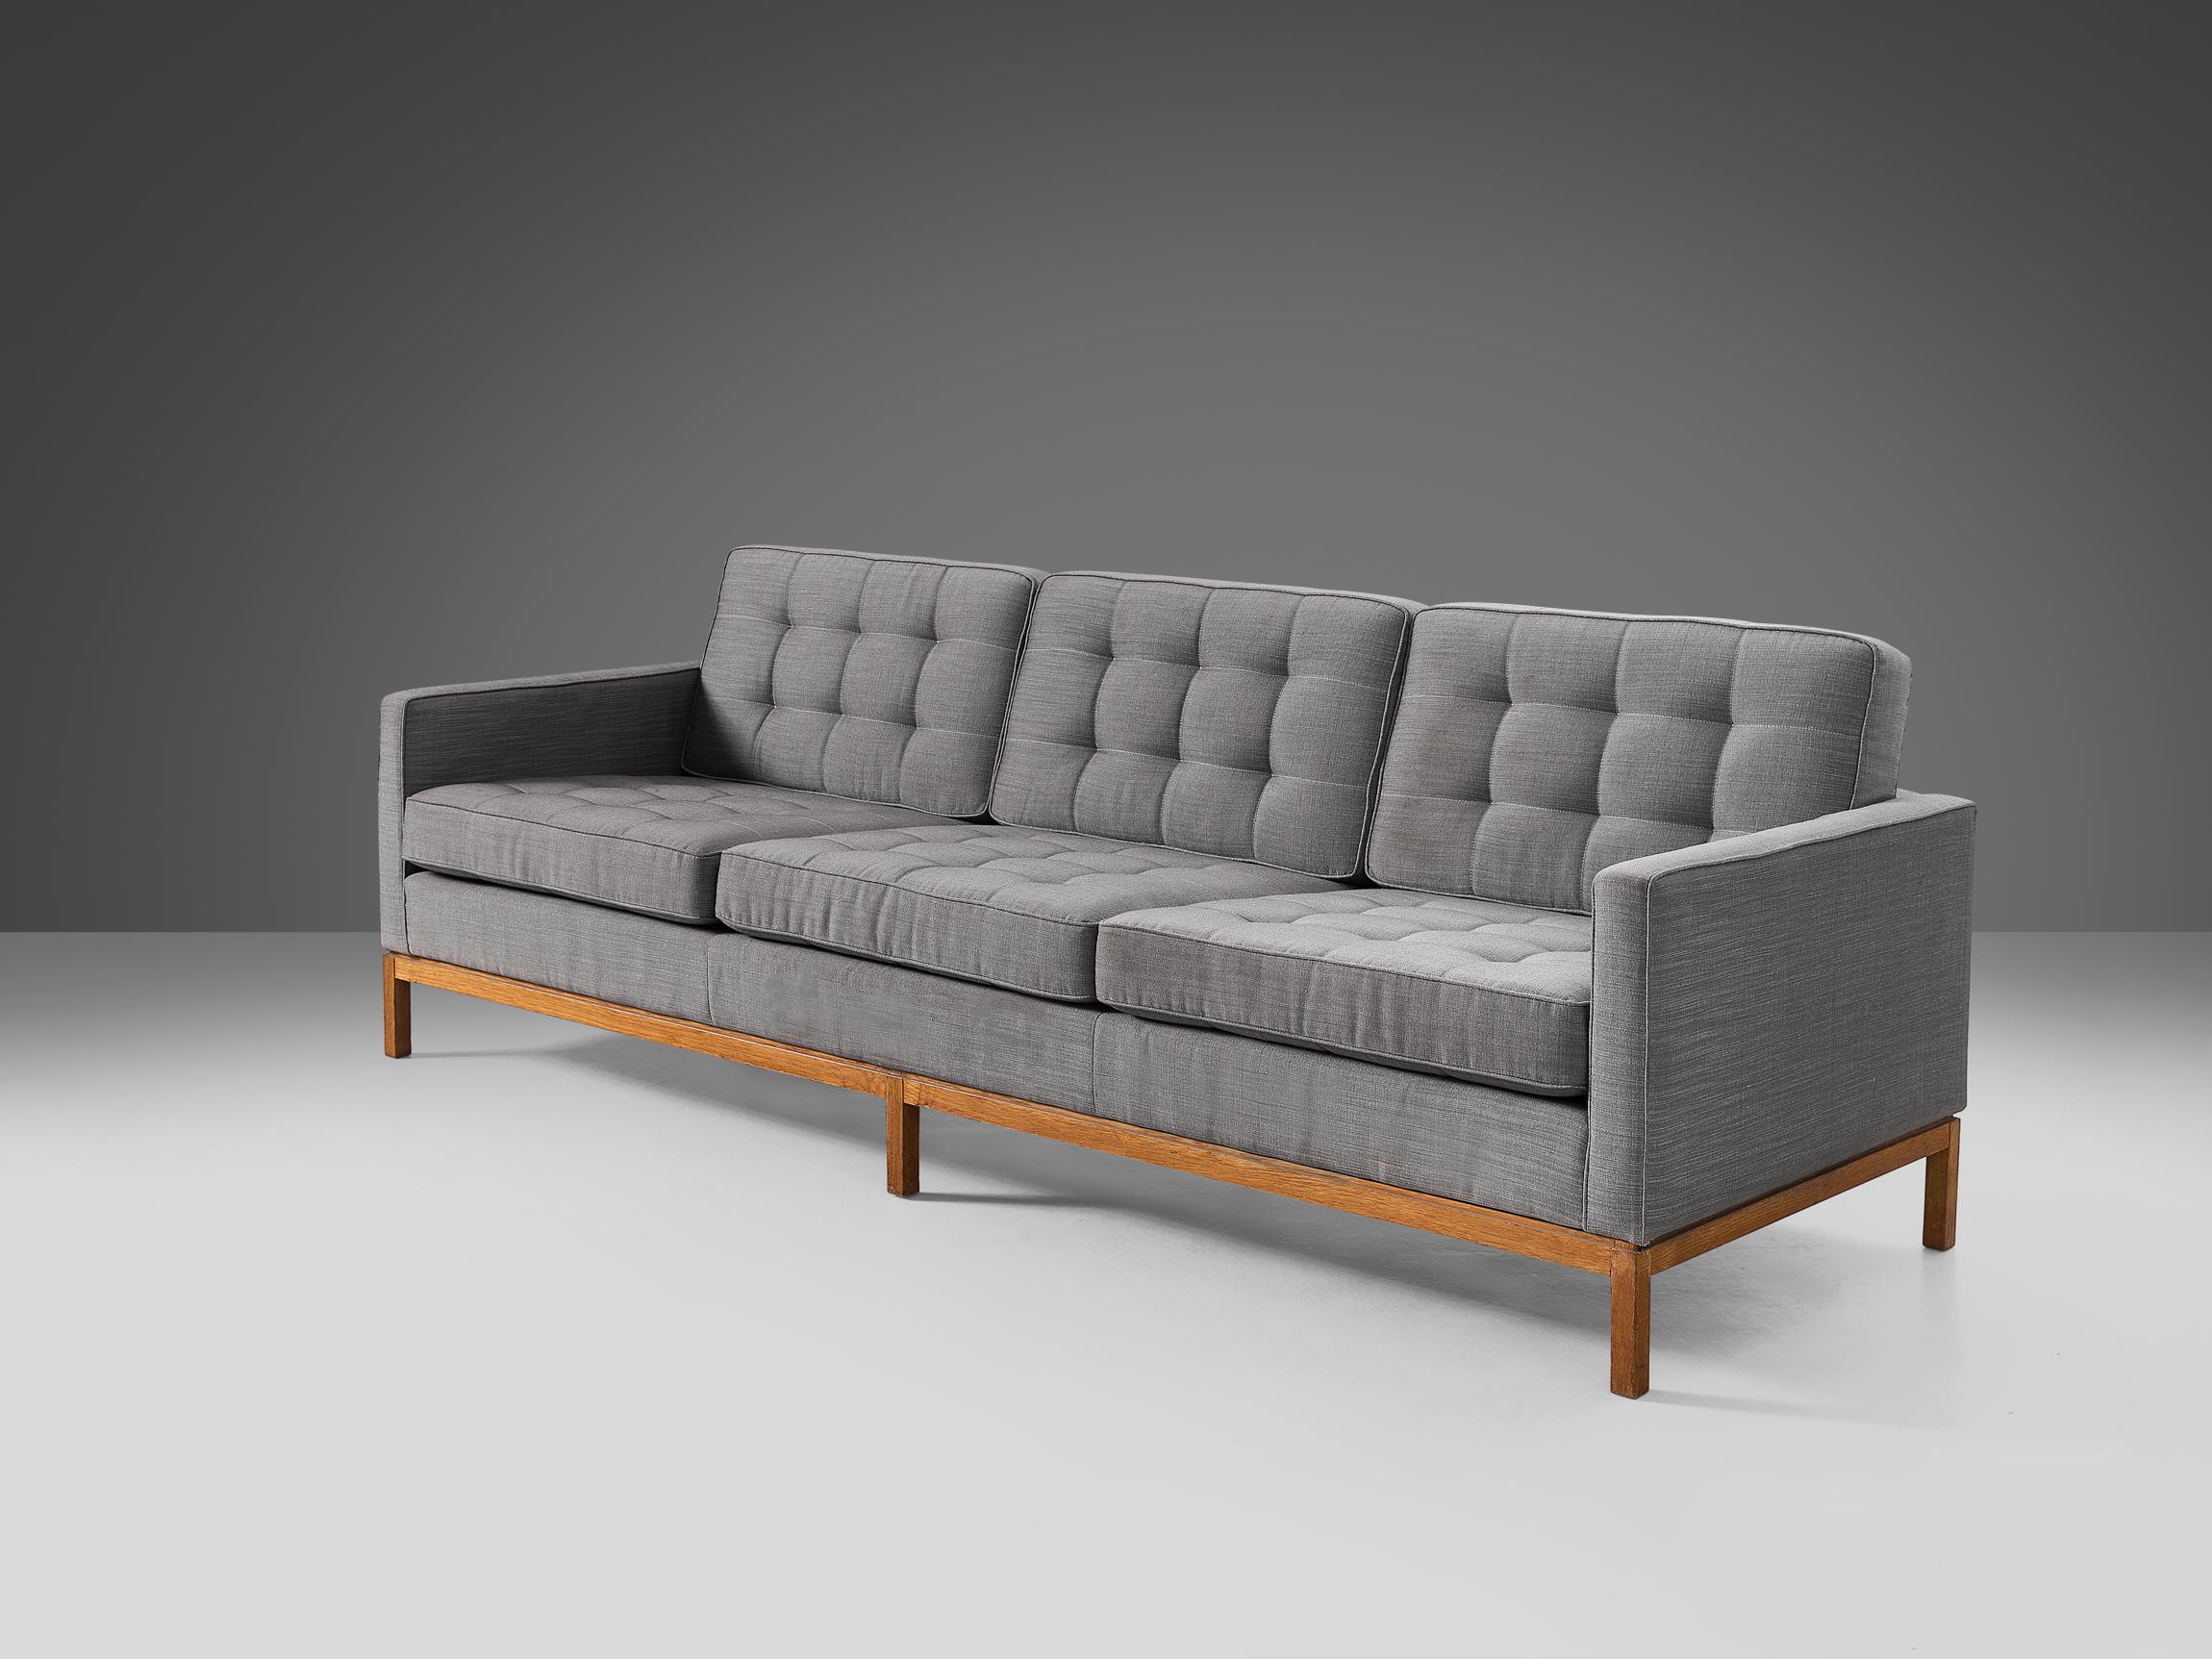 Florence Knoll for Knoll International, sofa, model '2557', fabric, teak, 1955

This sofa model 2557 is designed by Florence Knoll for Knoll International in 1955. This sofa is simplistic, yet stylish in its appearance. Due to the grey color of the